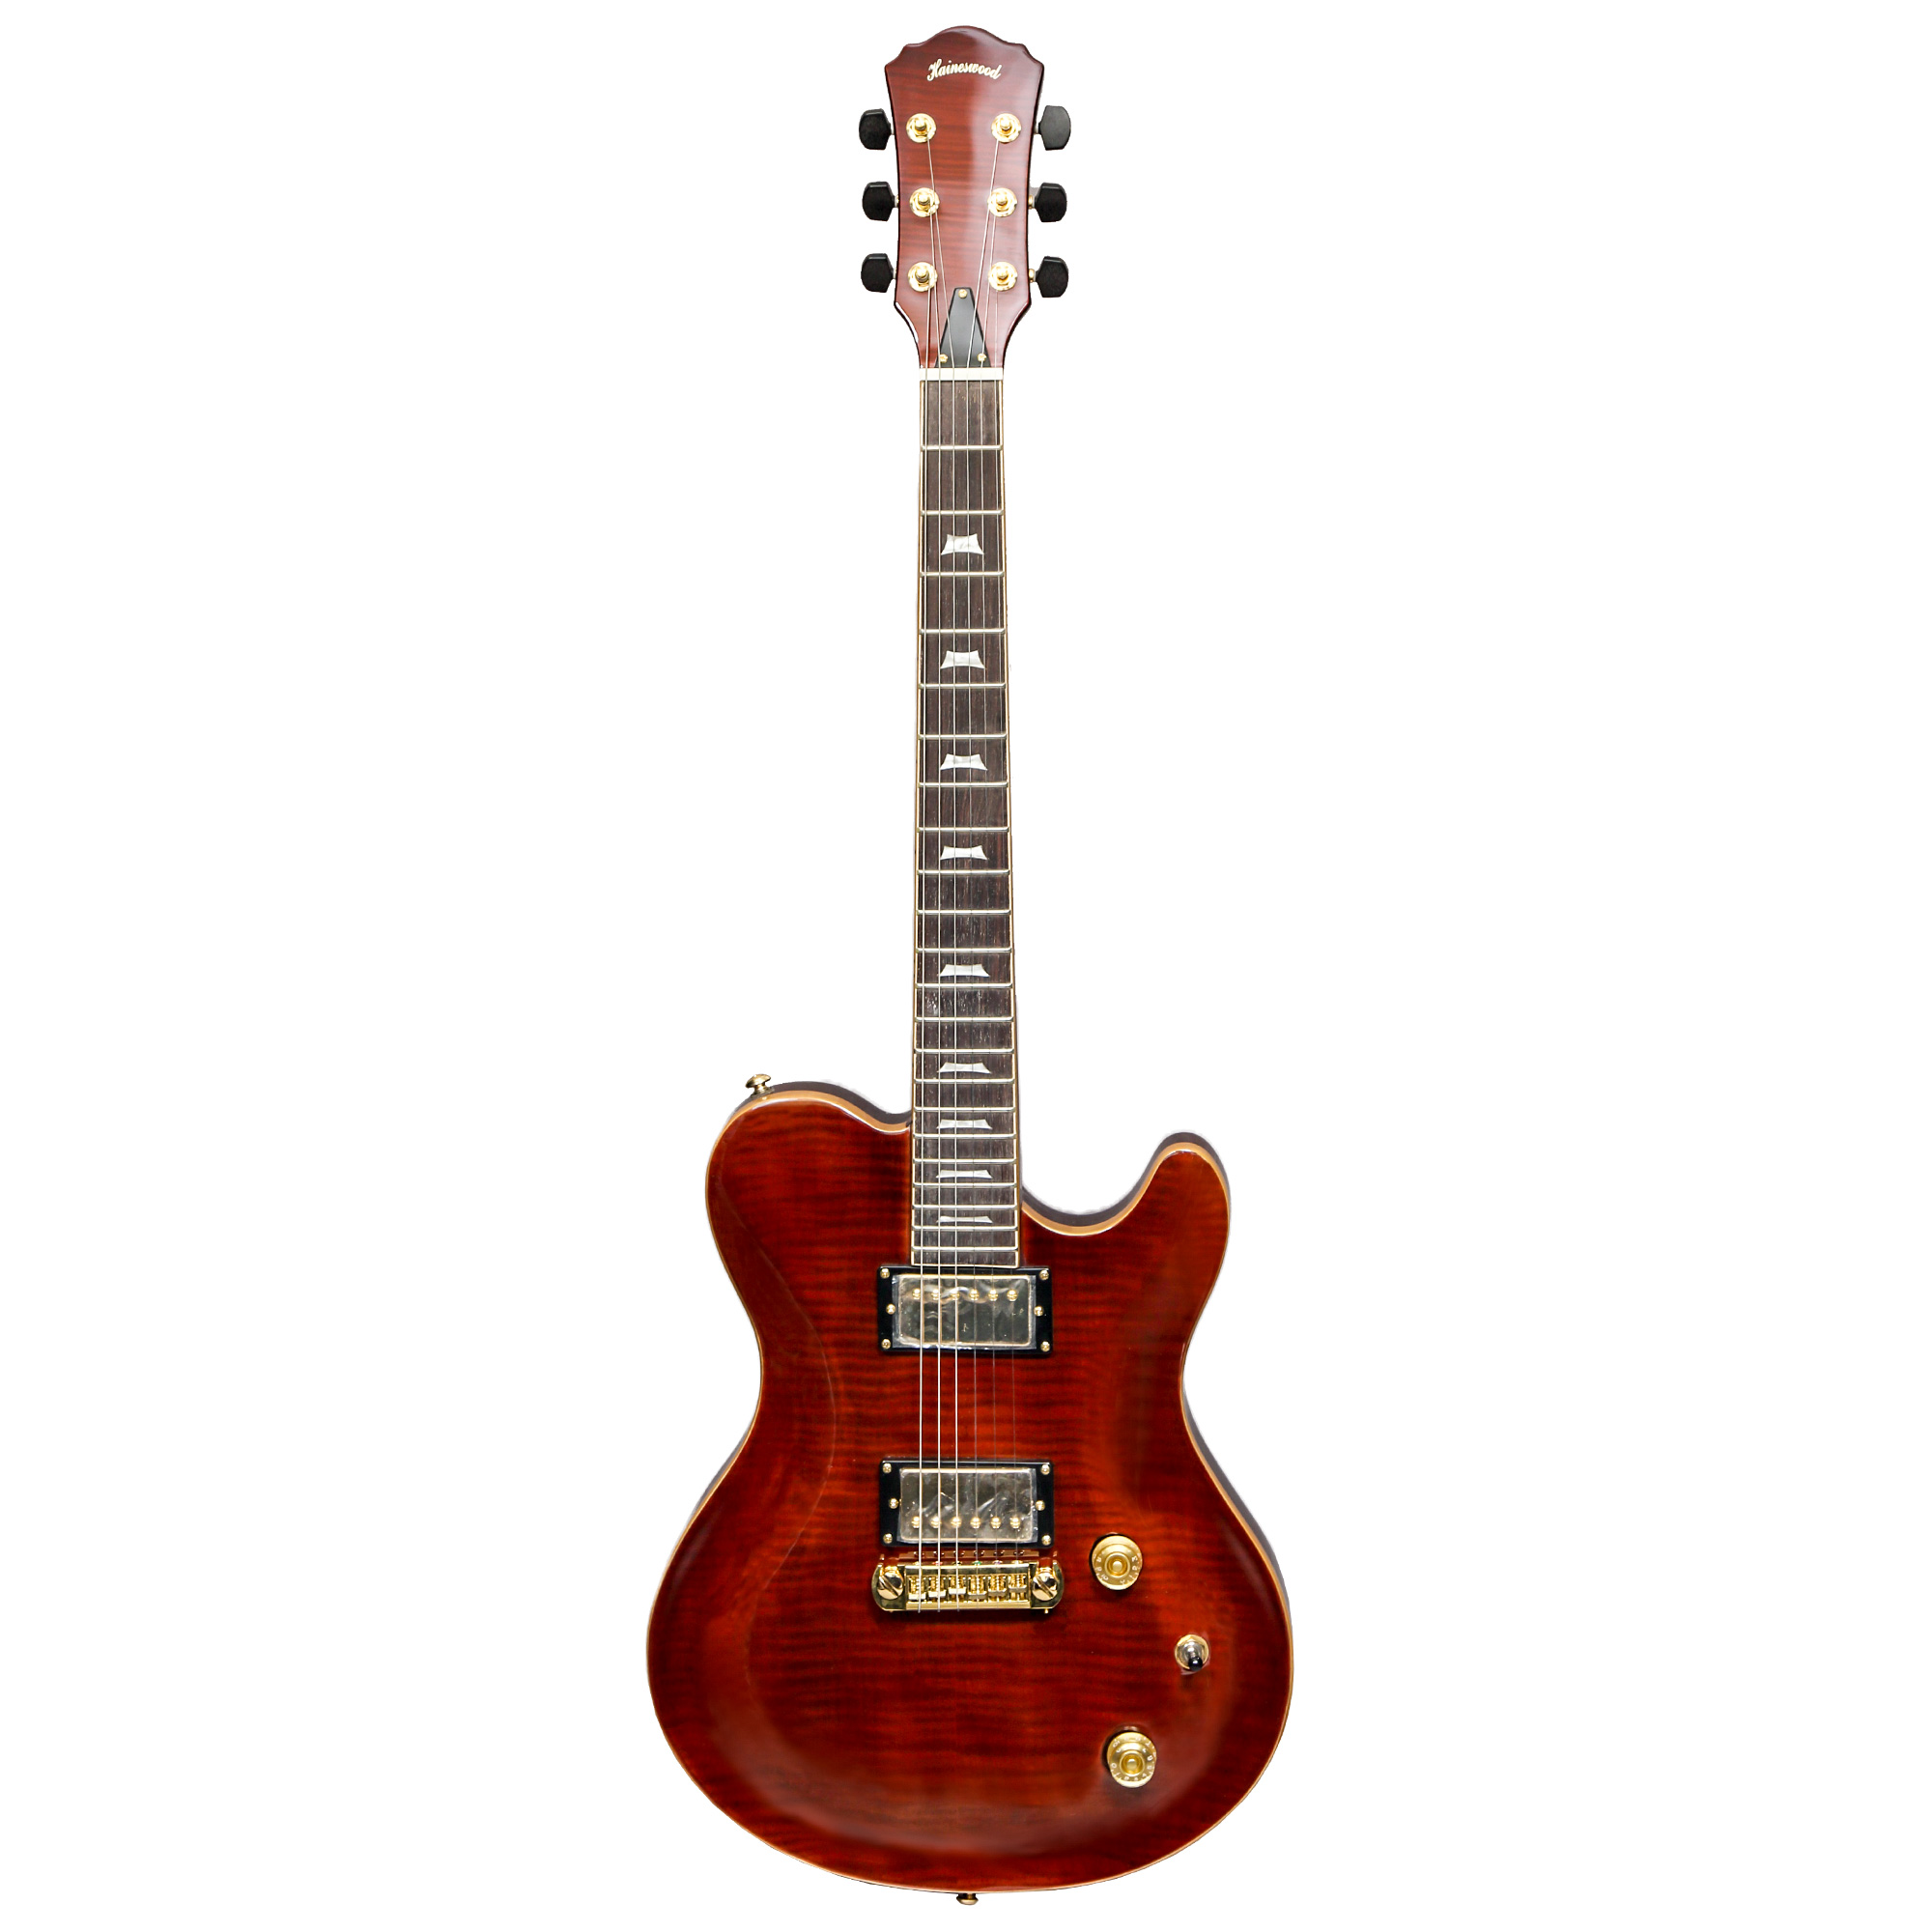 Haineswood Artist Series HGM-F Electric Guitar (Flamed Maple Natrual)